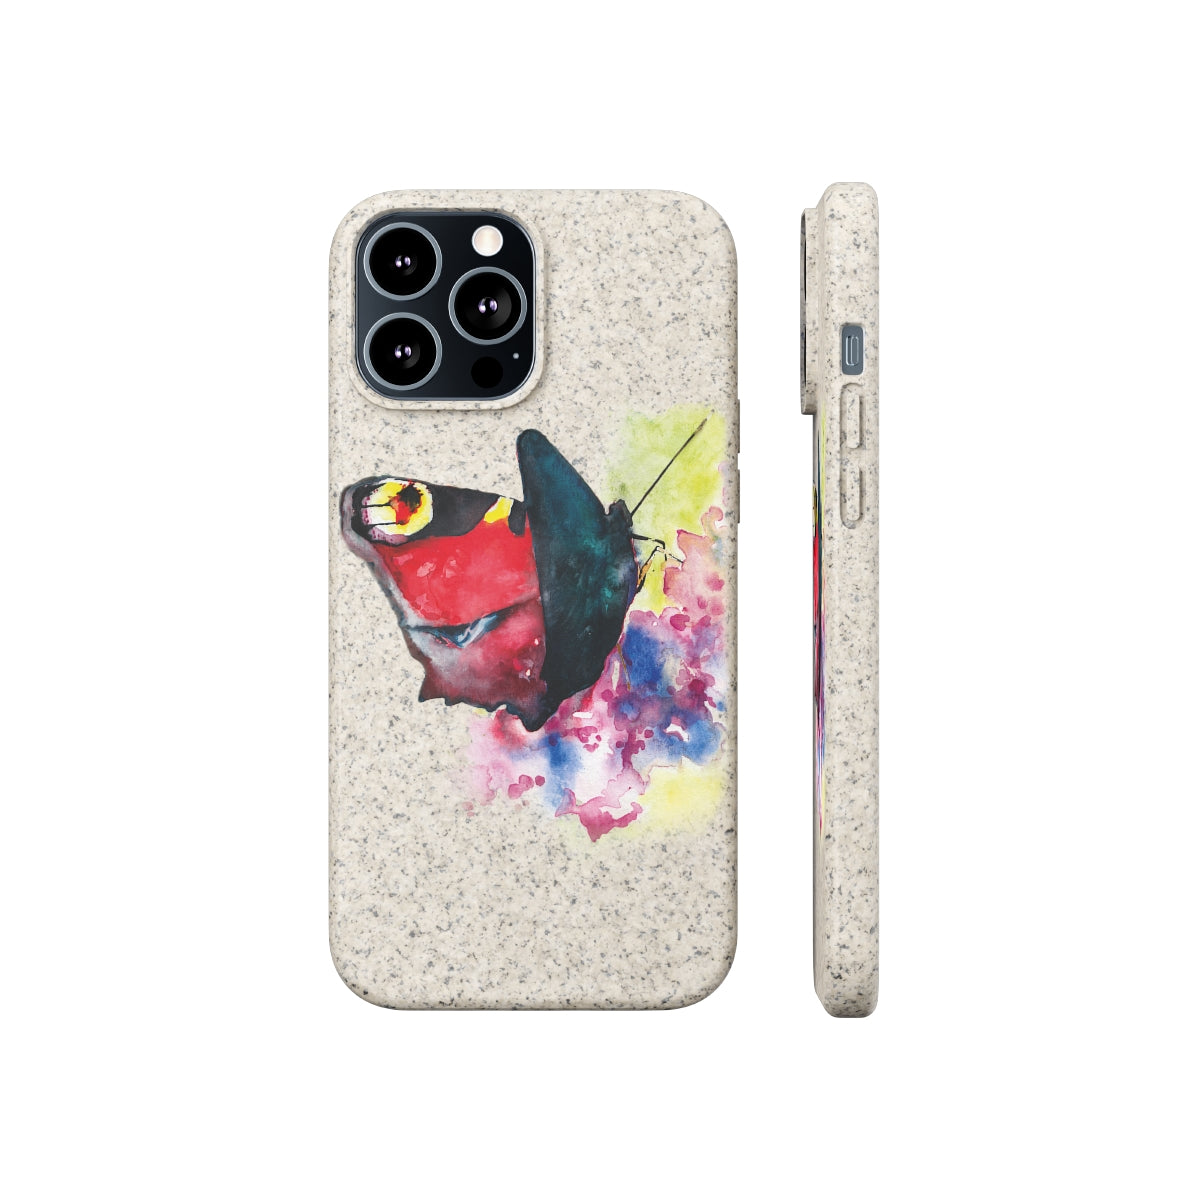 "Peacock Butterfly" Biodegradable Phone Case